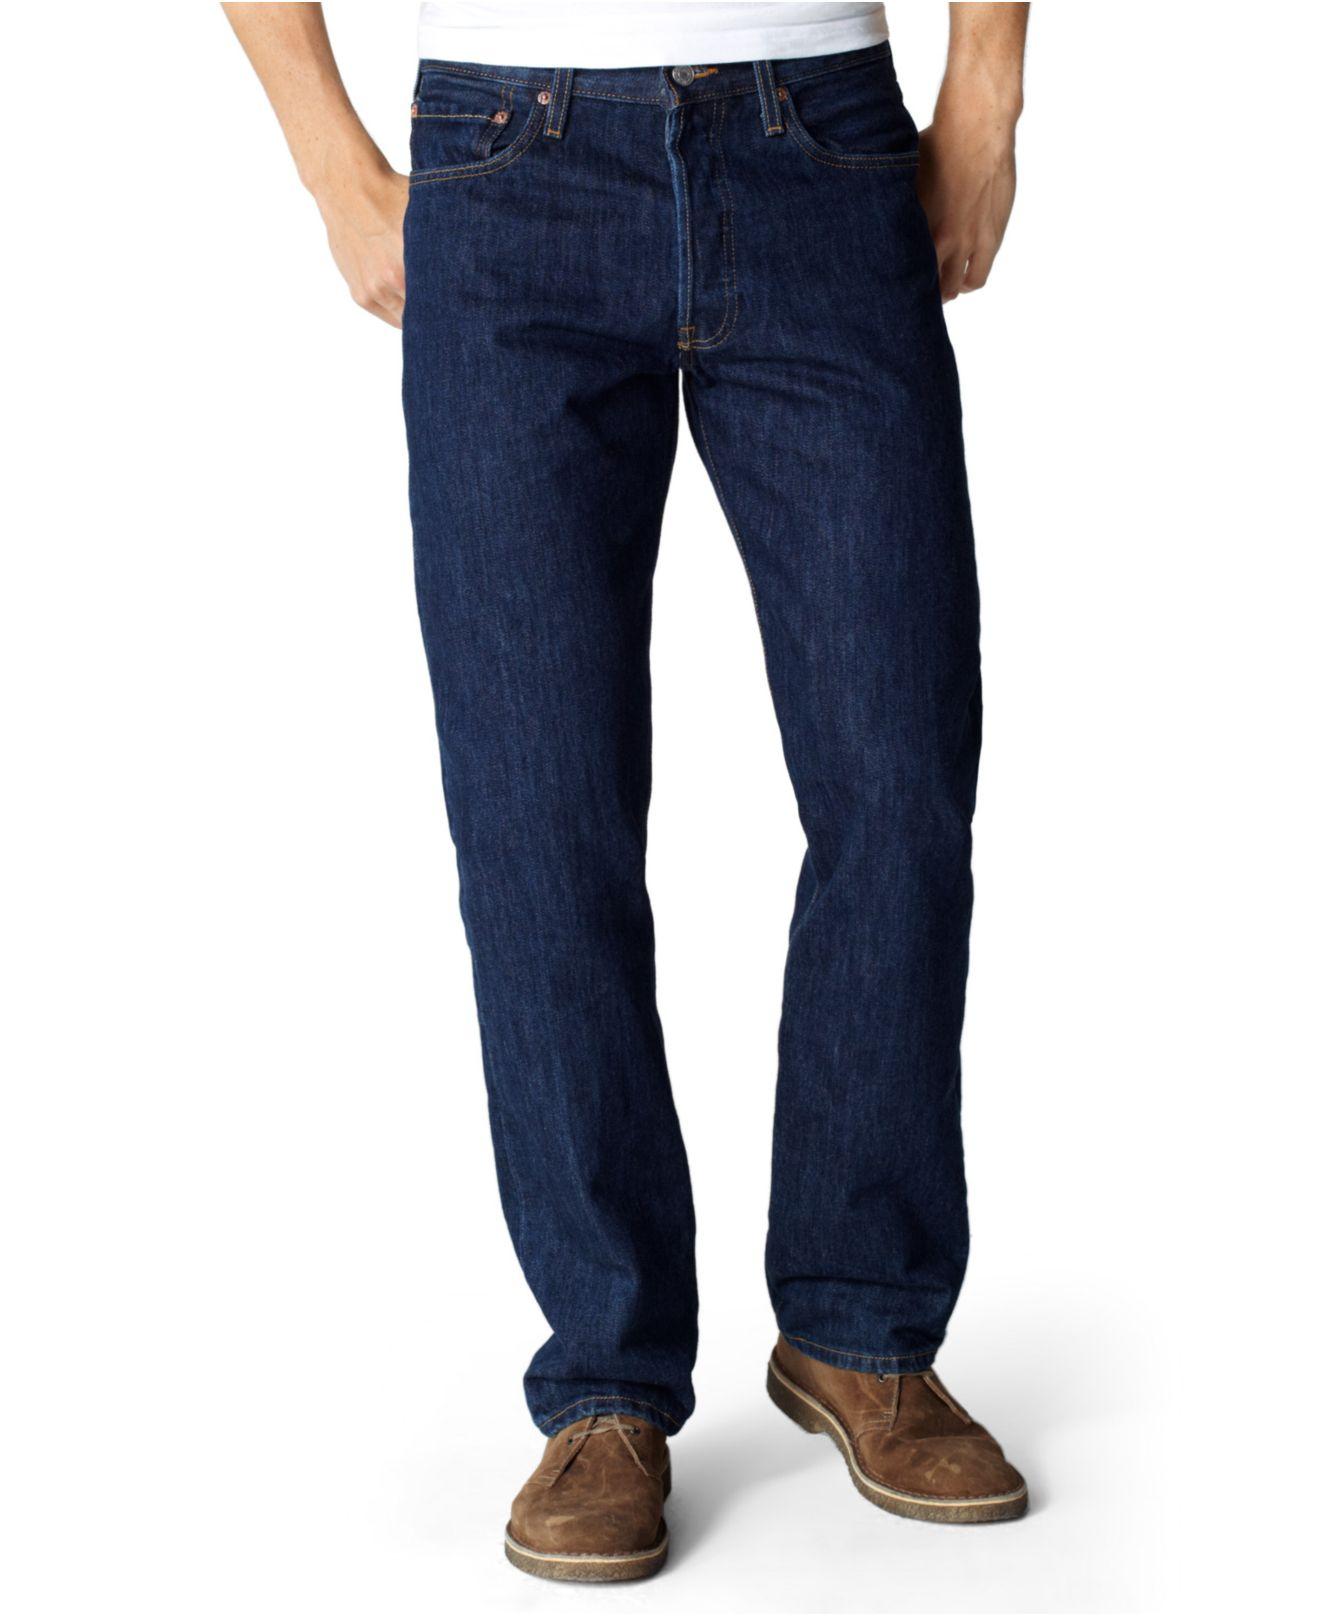 Levi's 501 Original Fit Non-stretch Jeans in Blue for Men - Save 38% - Lyst